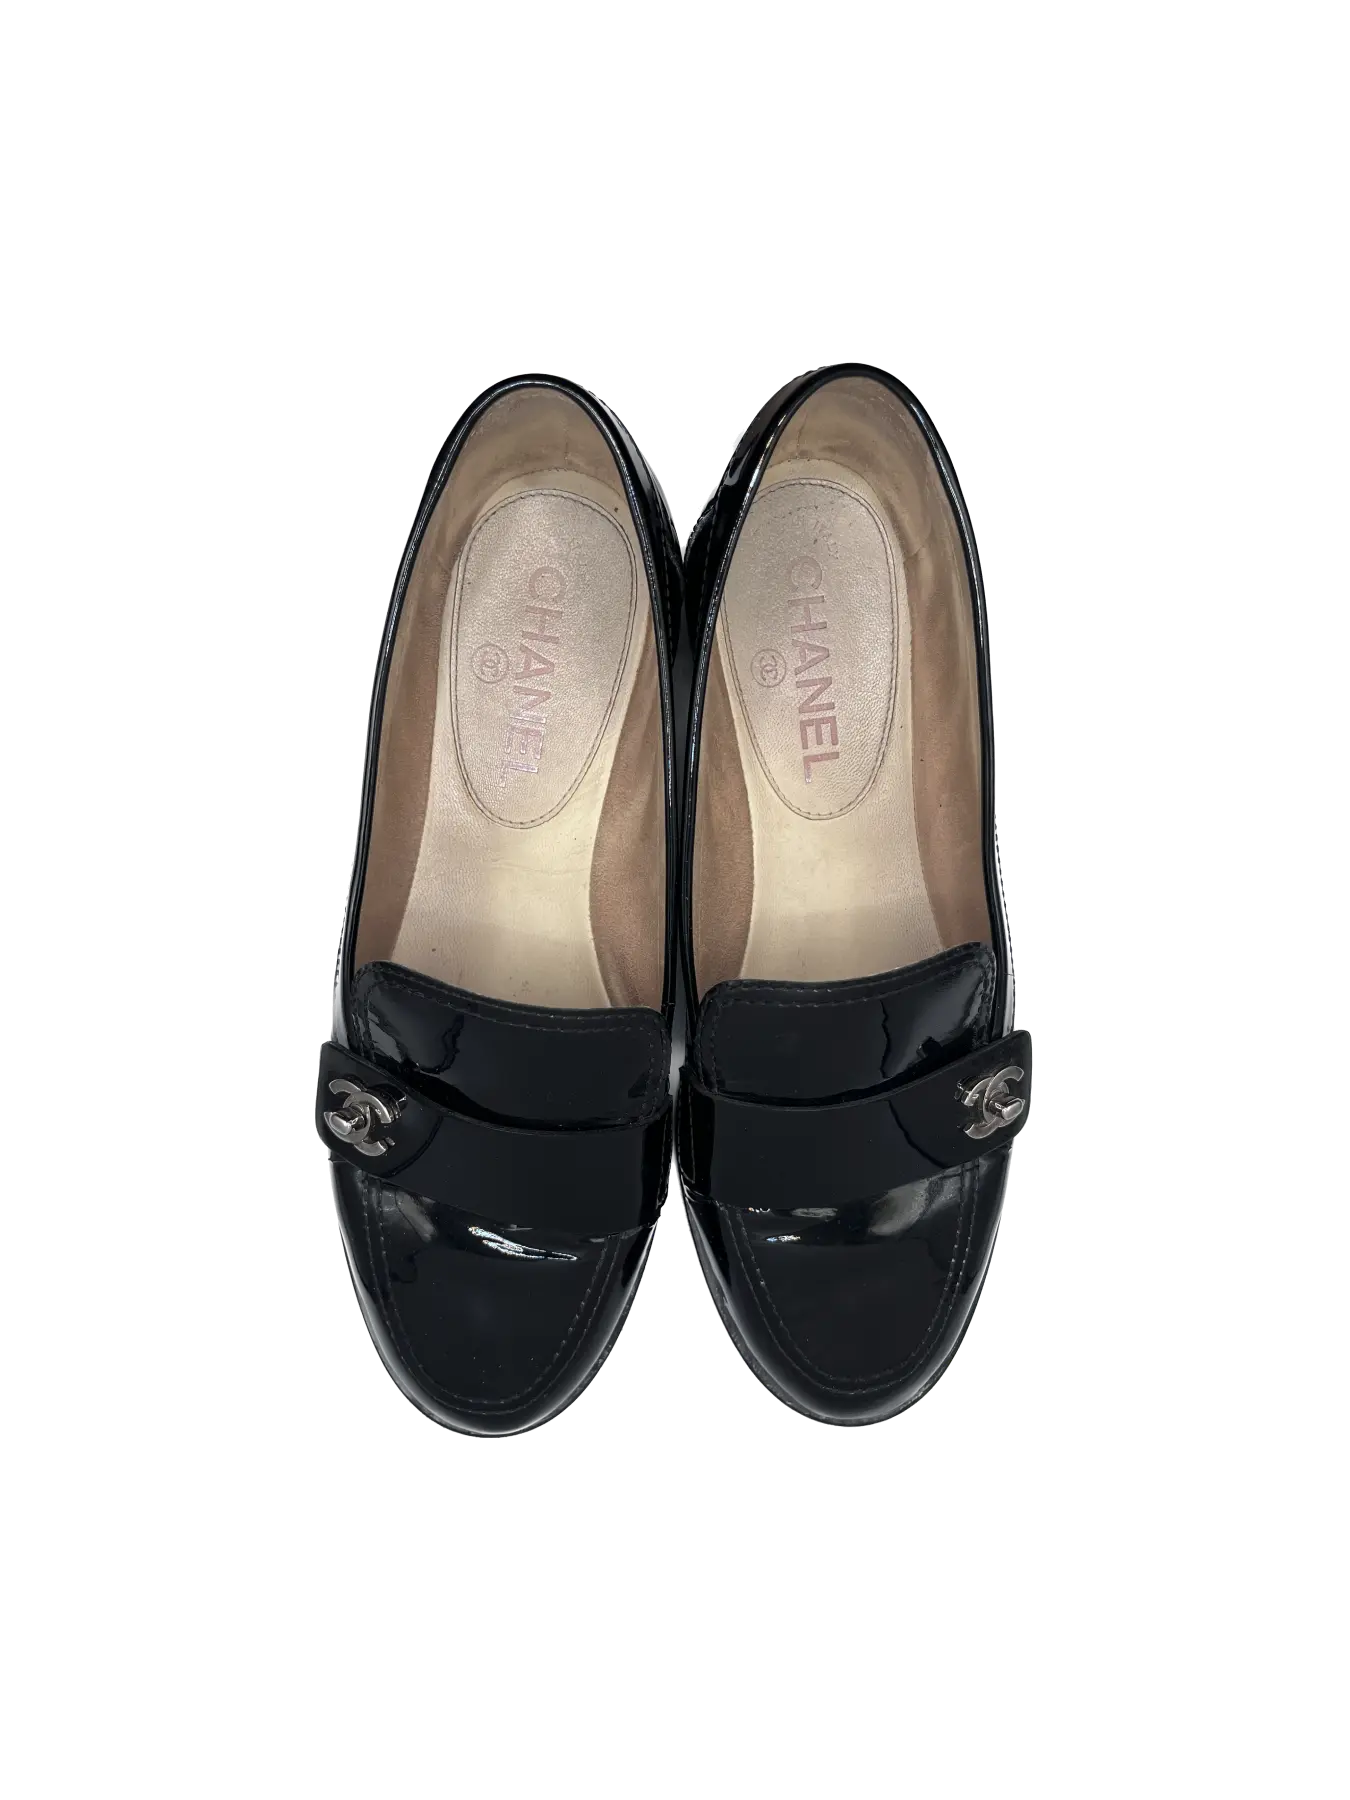 Chanel Interlocking CC Logo Loafers, 37.5 | Archive Square Chanel loafers the millennial decorator